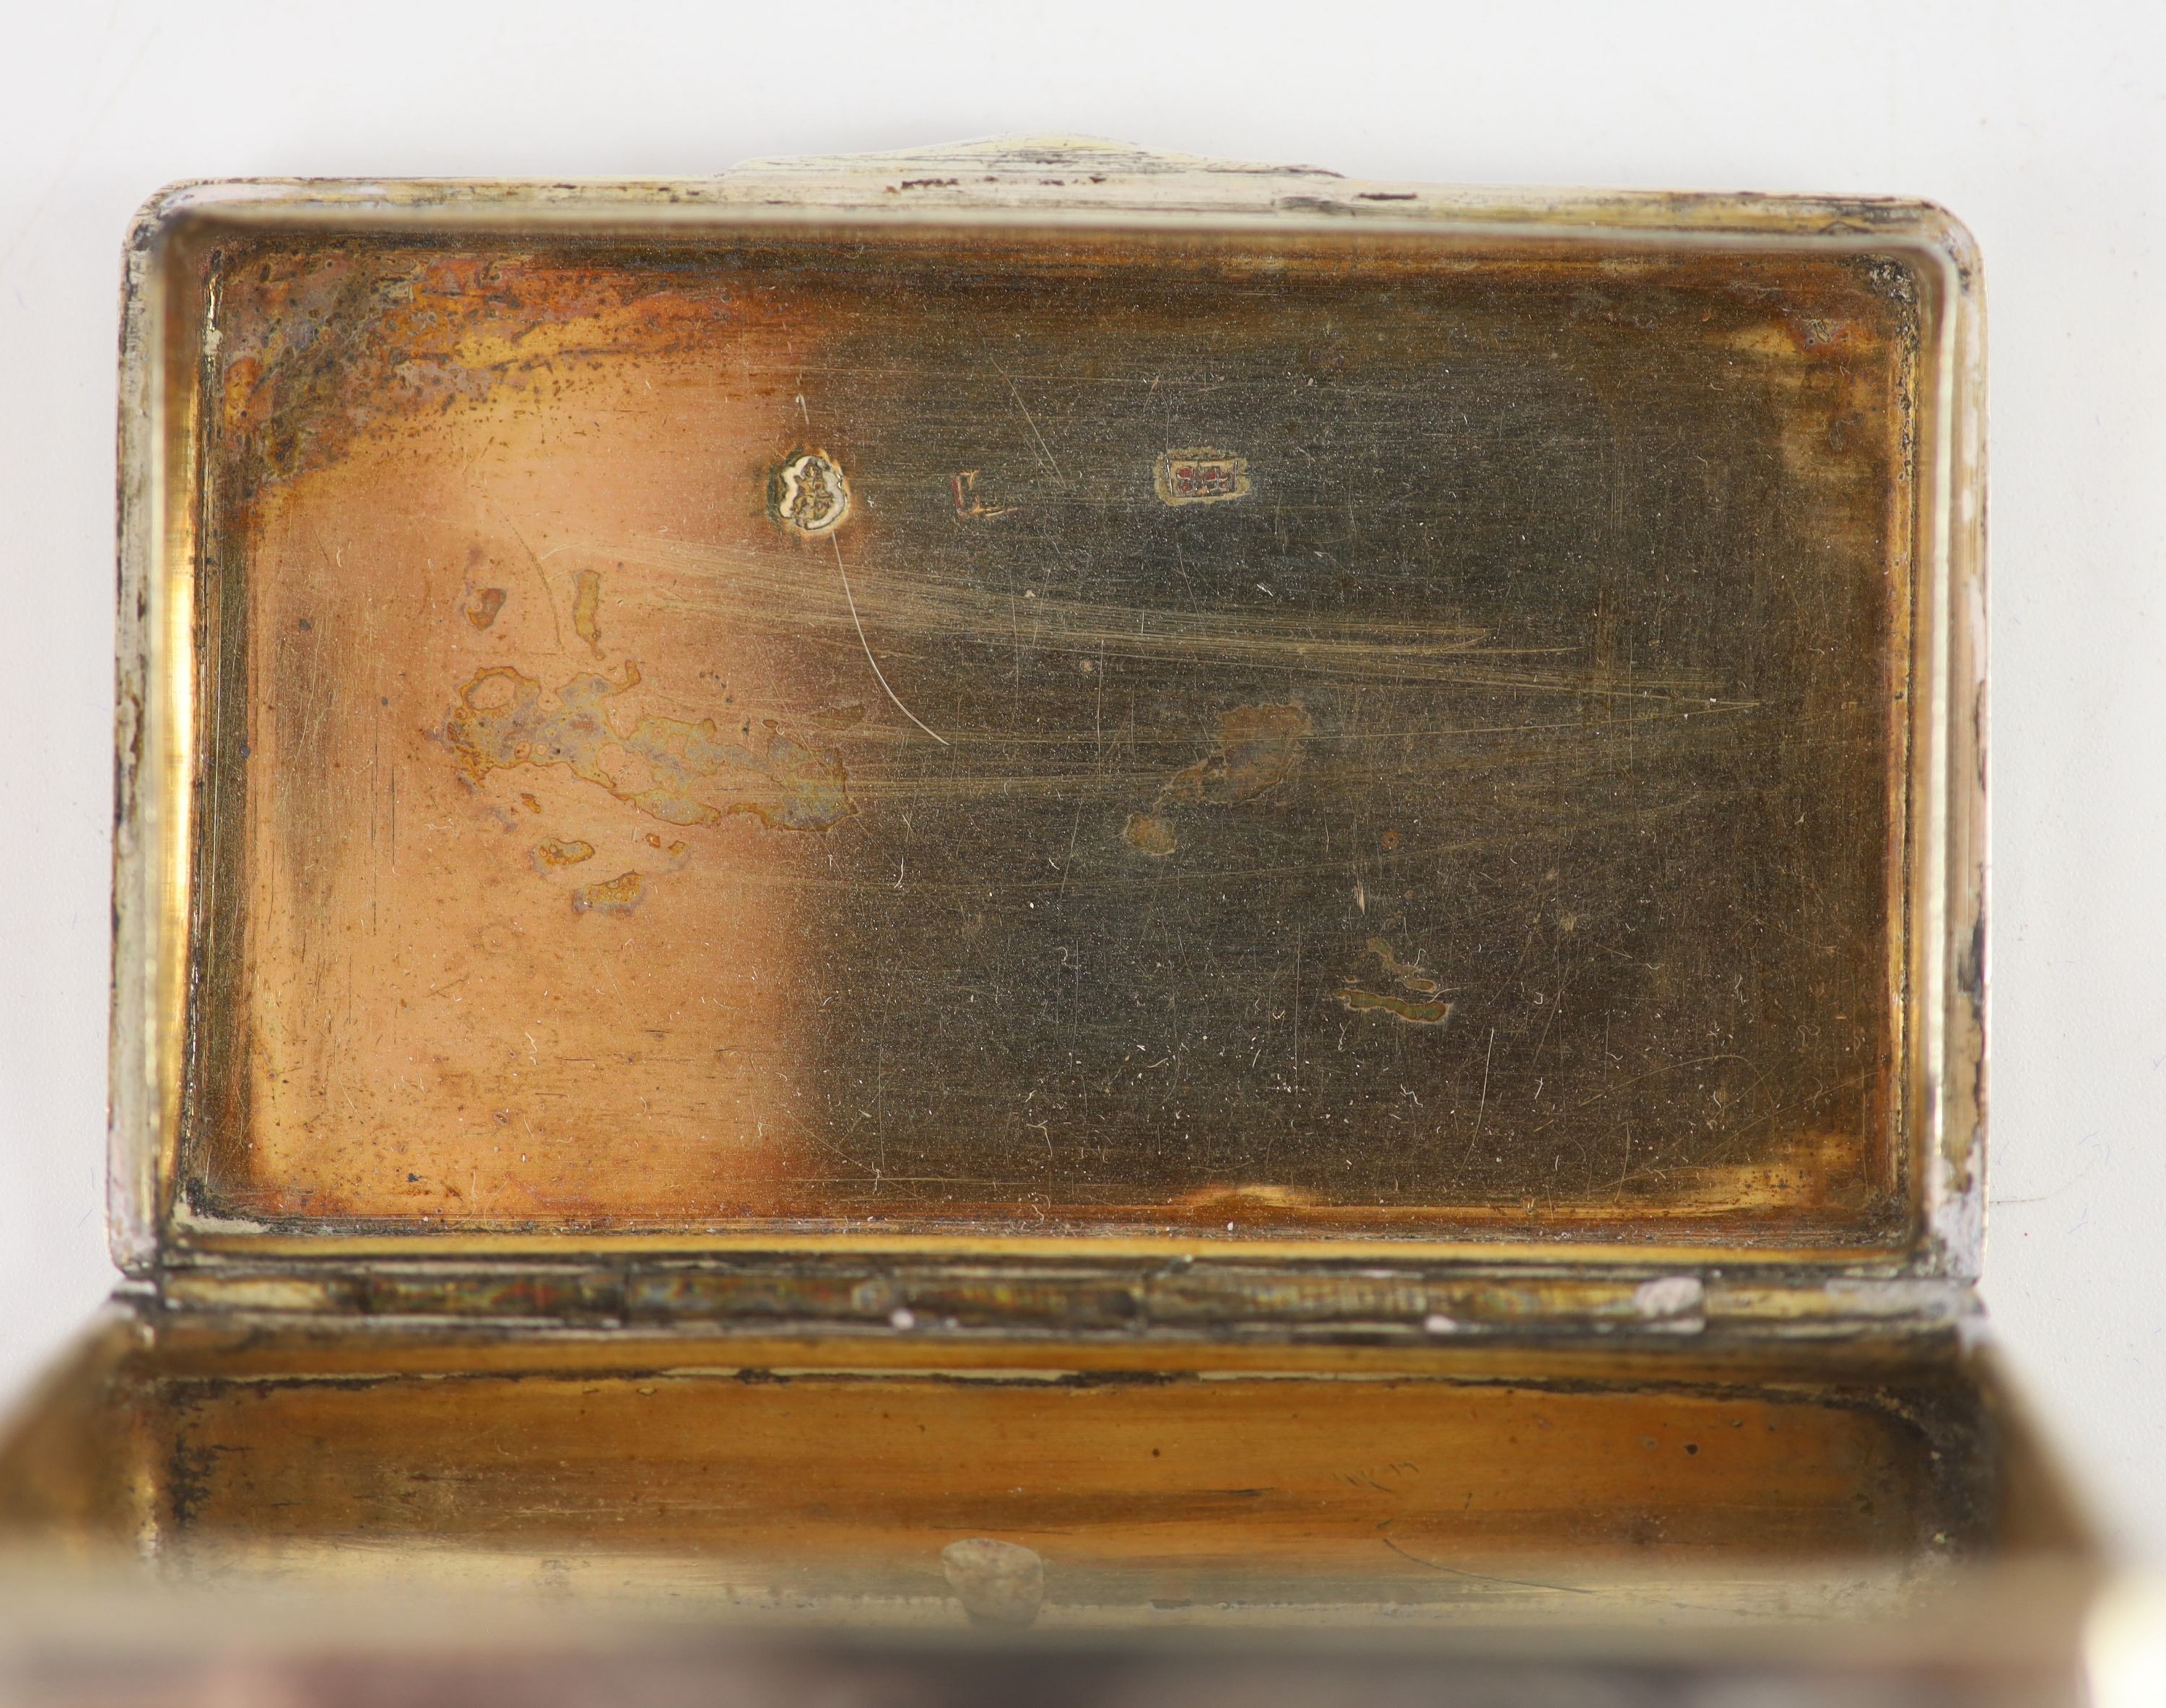 An early 19th century Russian 84 zolotnik parcel gilt silver and niello snuff box, assay master possibly Nicholai Brubovin,1830